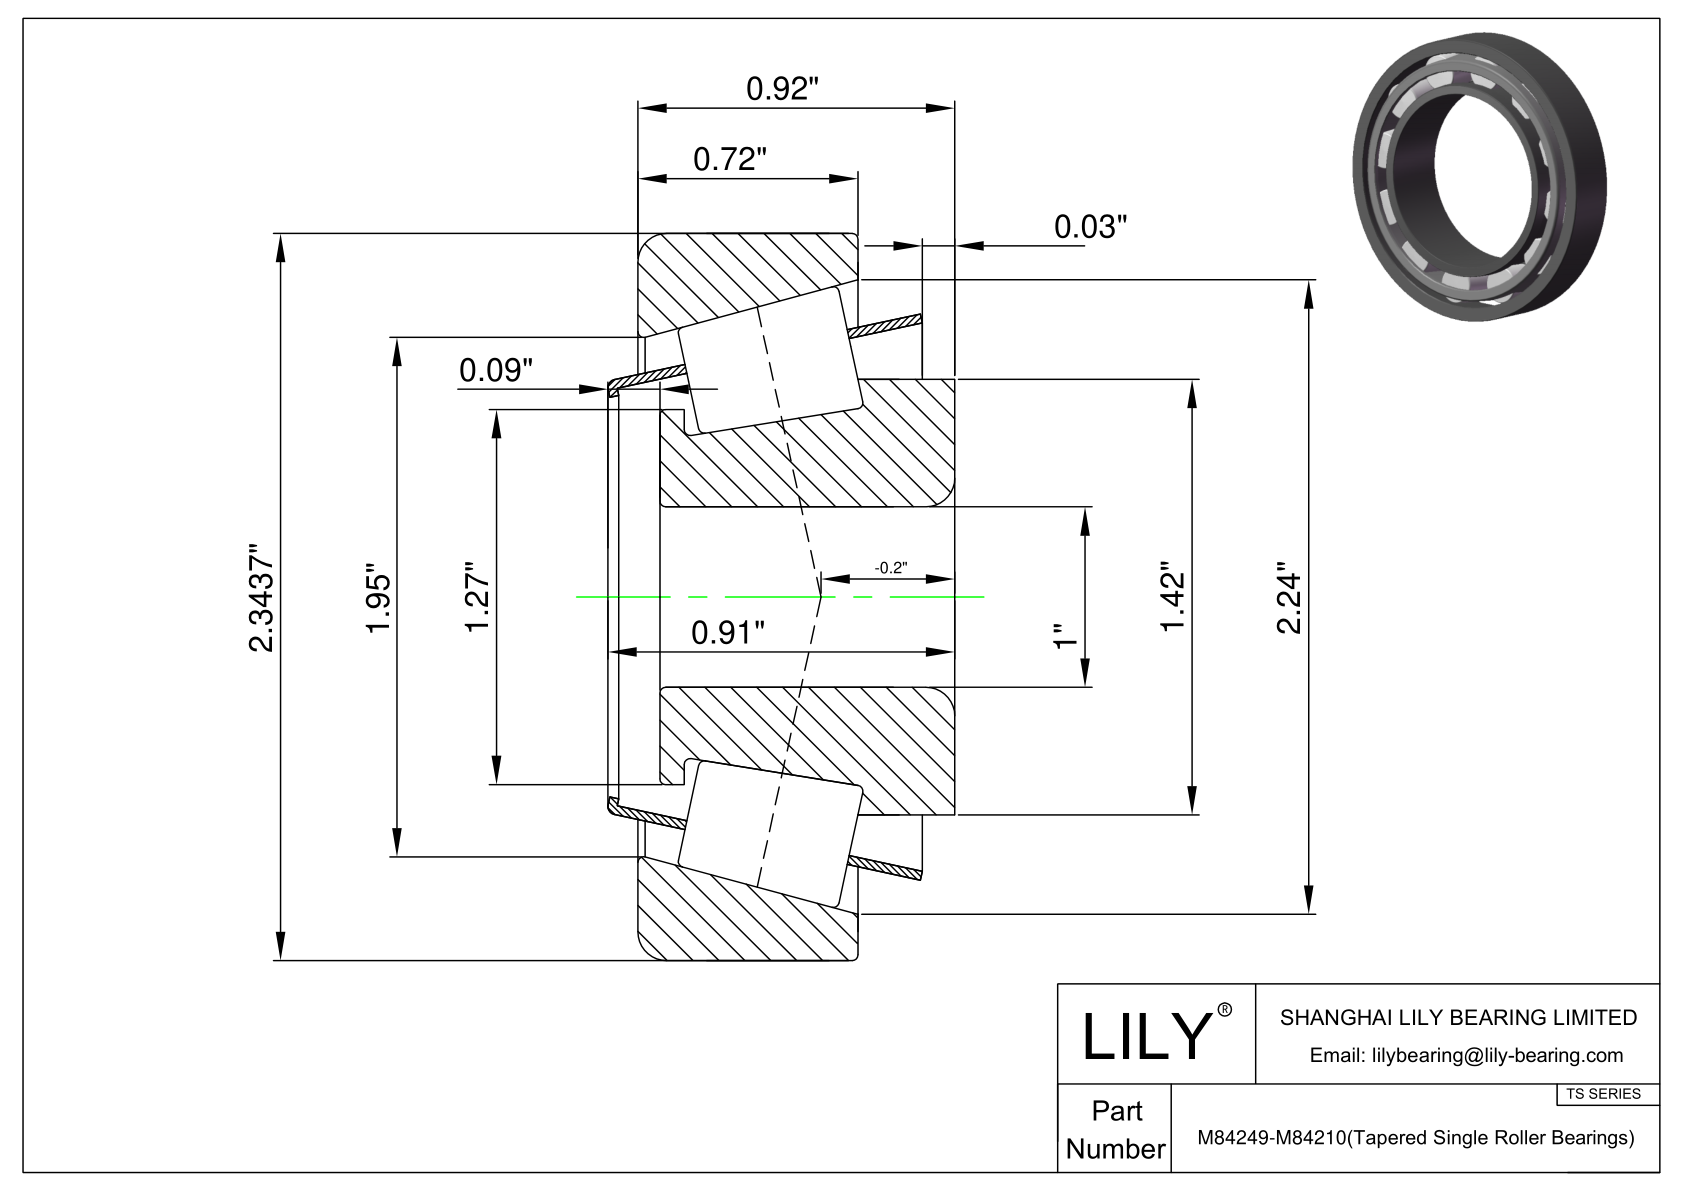 M84249-M84210 TS (Tapered Single Roller Bearings) (Imperial) cad drawing